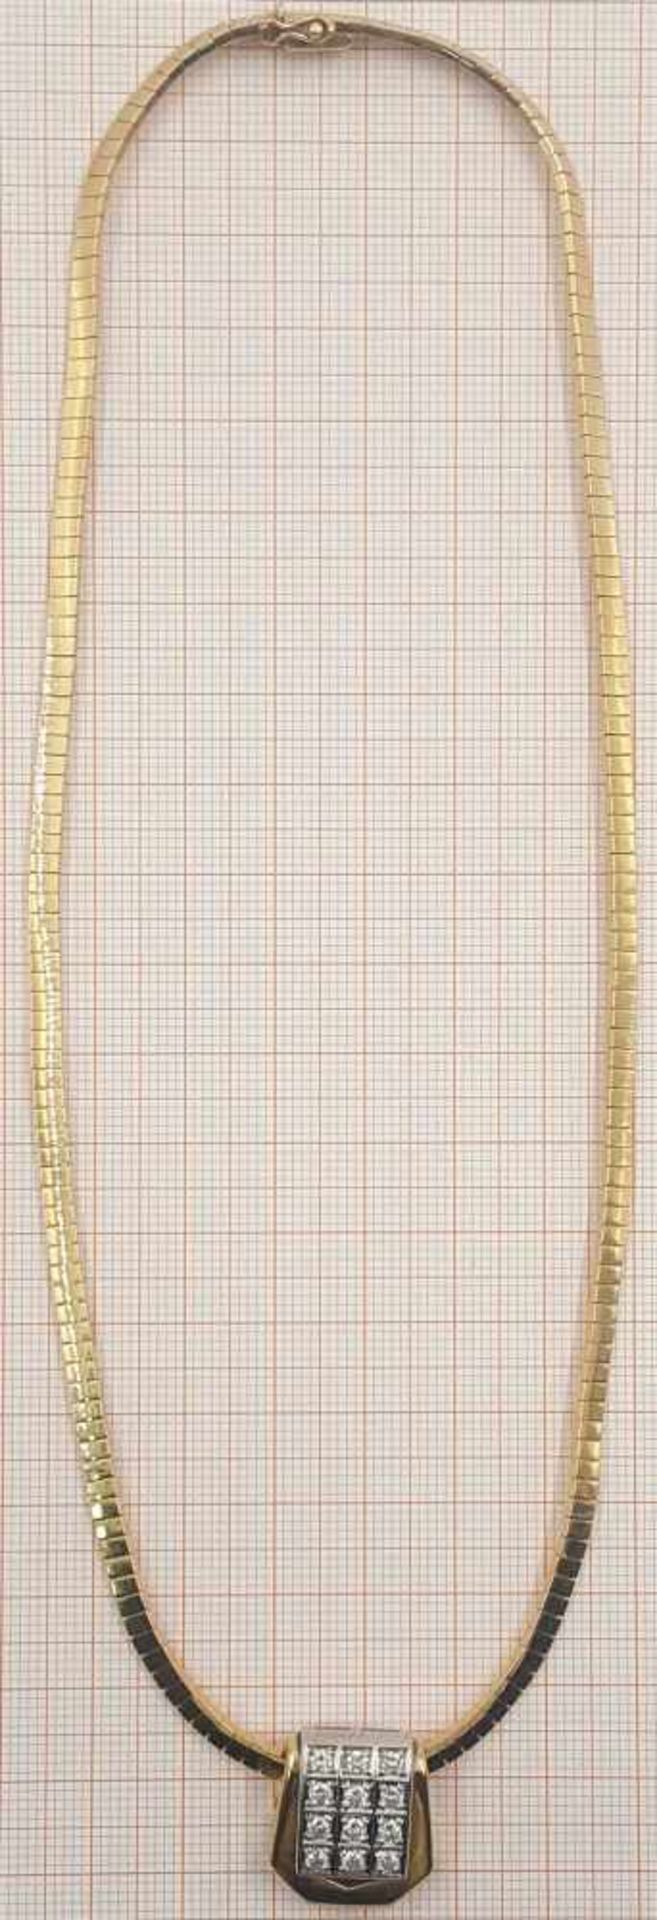 Necklace, 750 yellow gold and pendant with 12 diamonds. - Image 6 of 8